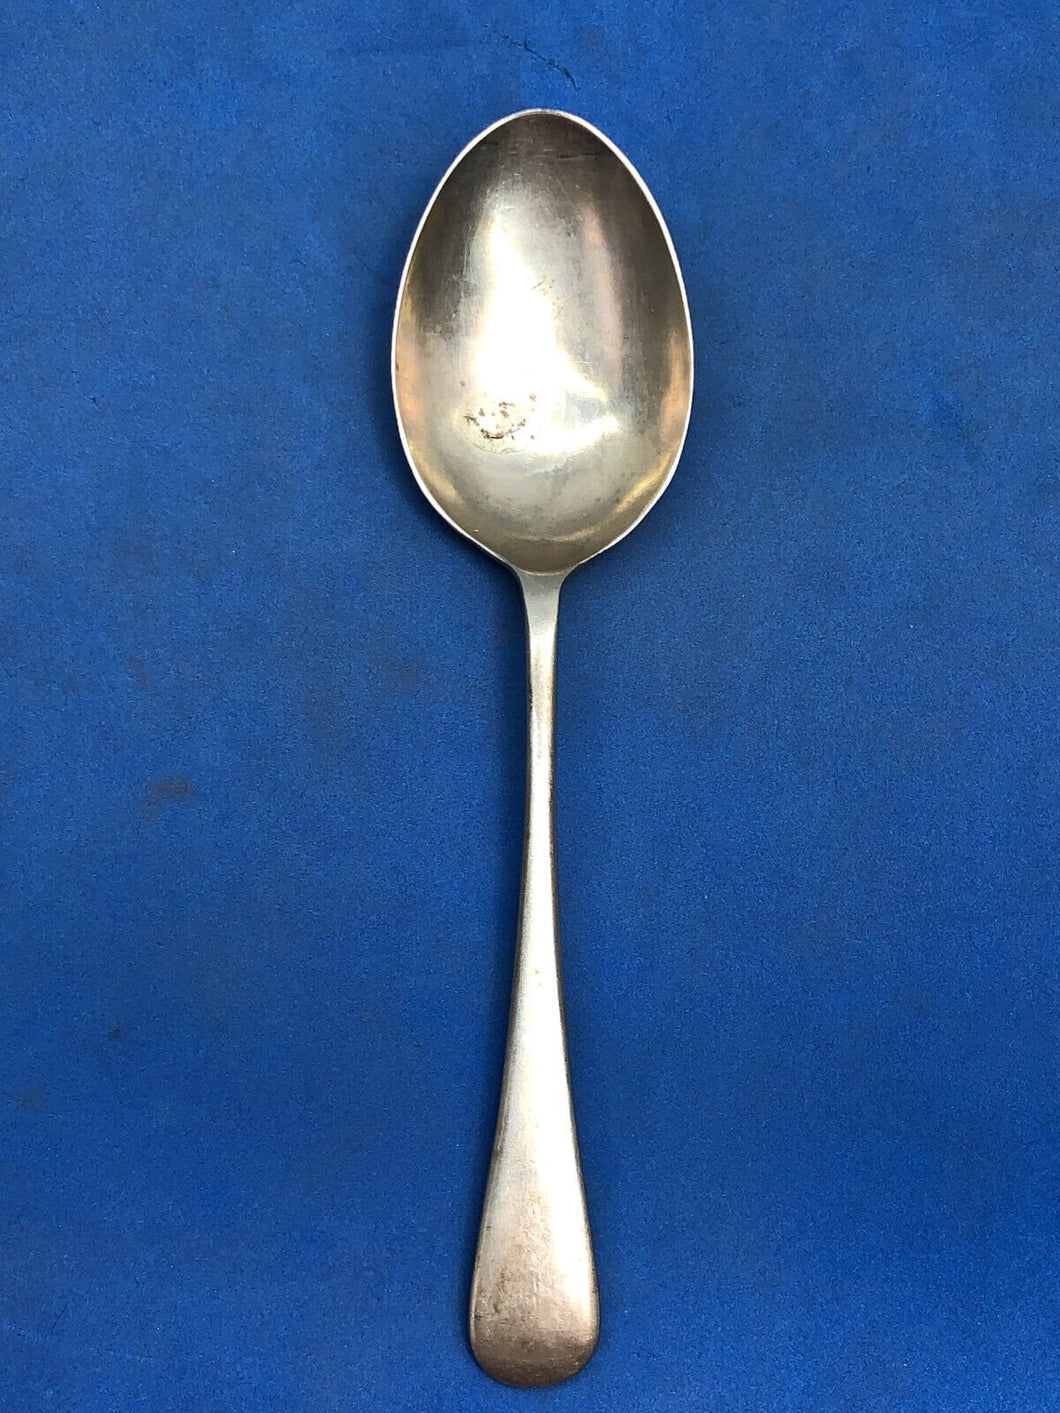 Original WW2 British Army Officers Mess WD Marked Cutlery Spoon - 1941 Dated